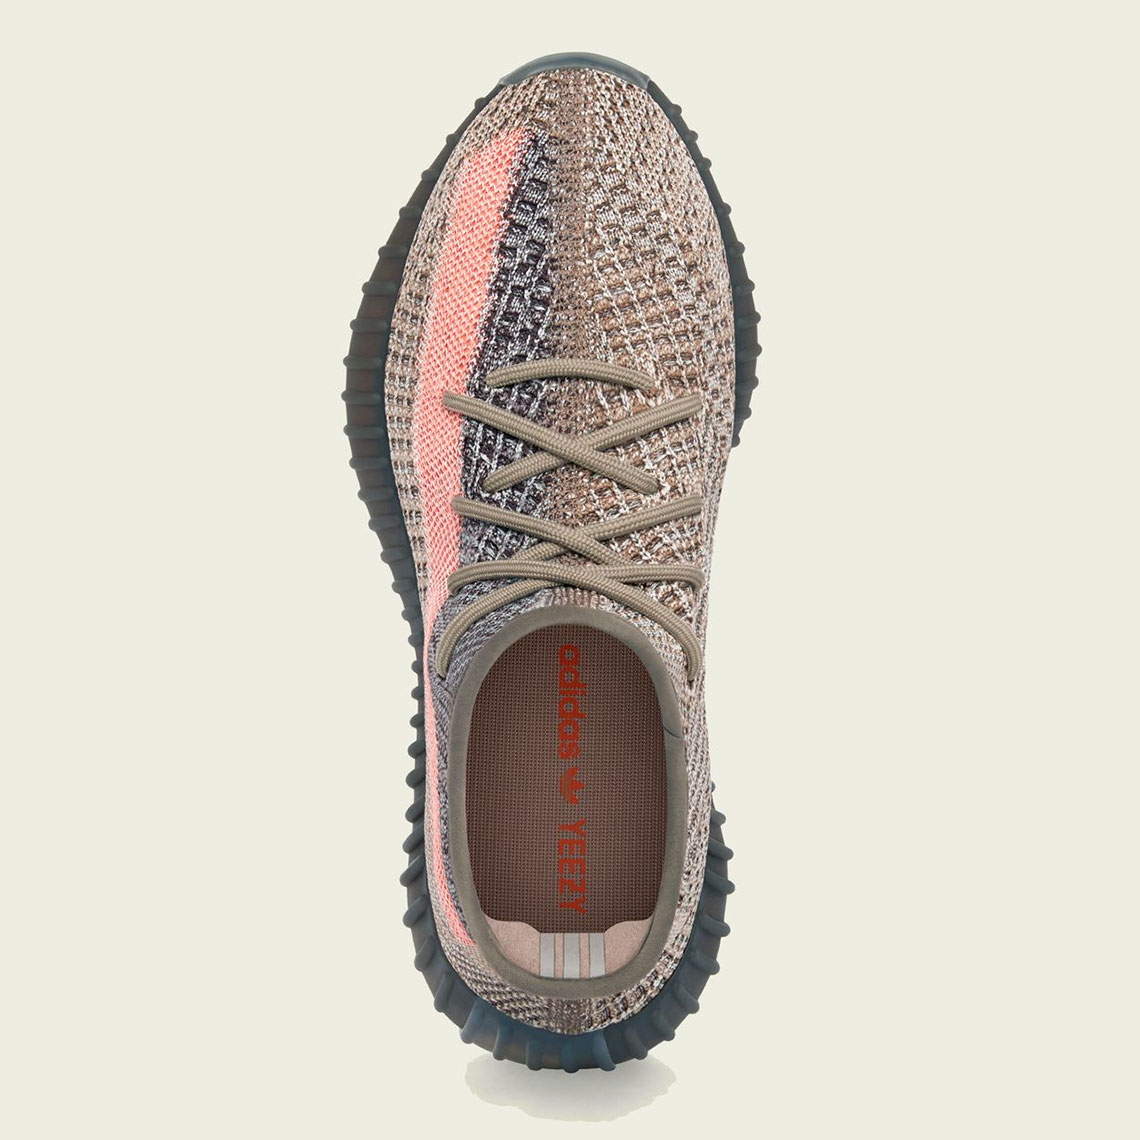 Adidas Yeezy Boost 350 V2 Ash Stone Gw0089 Official Images 2